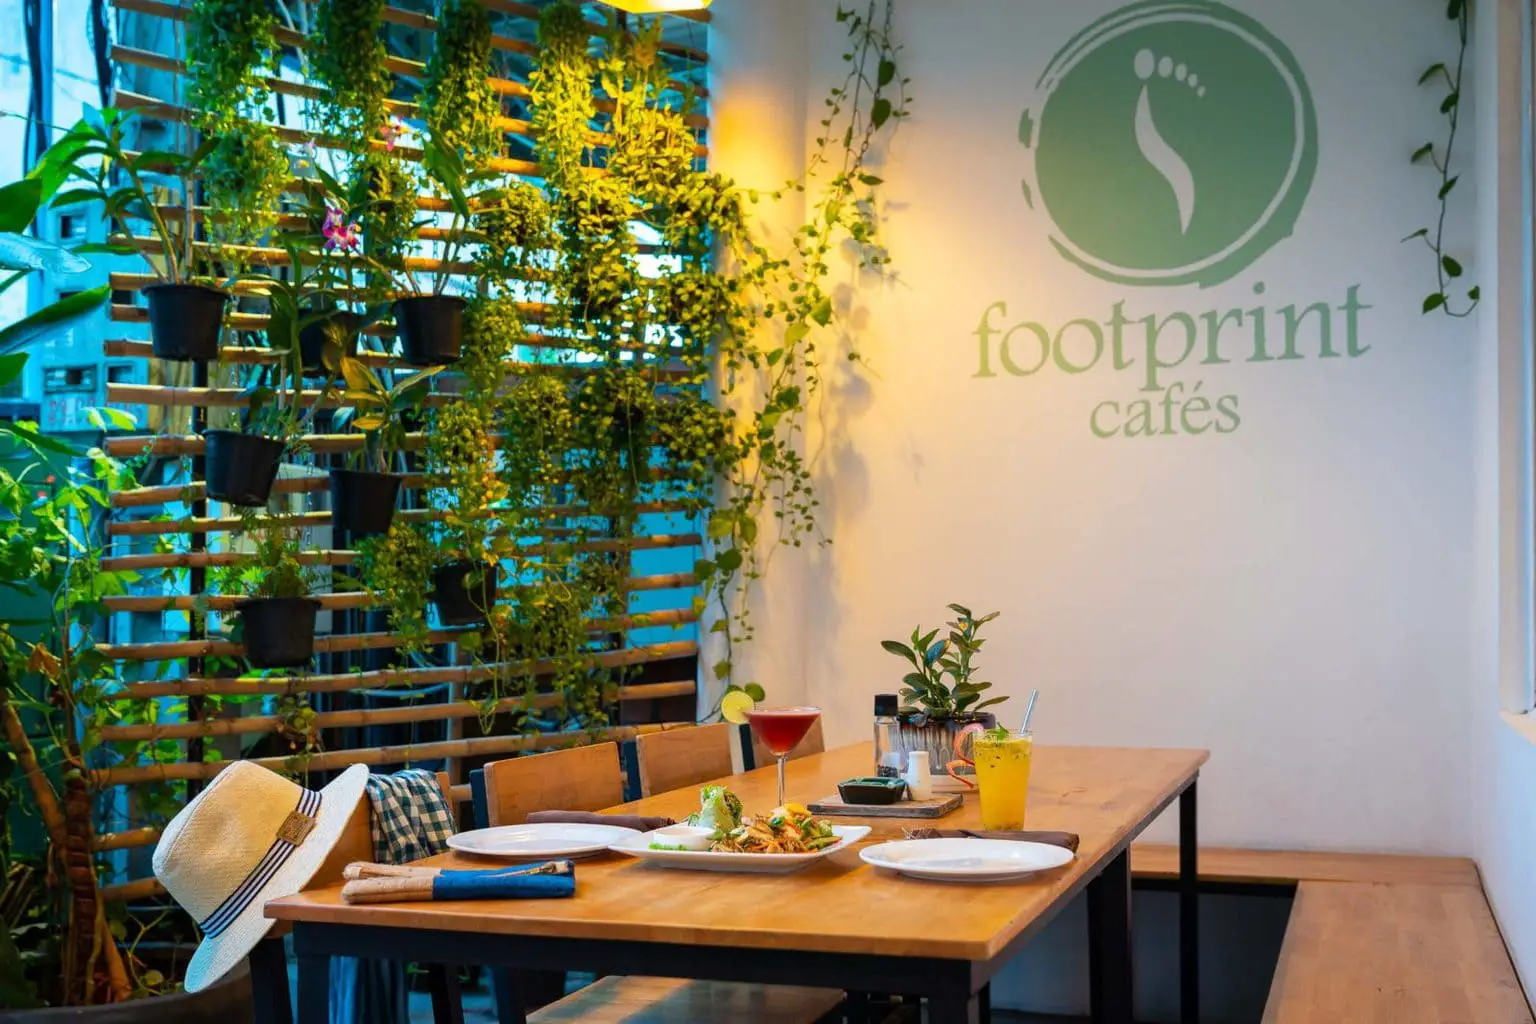 Wonderful Footprints Cafe in Siem Reap. Perfect place to refuel and work.